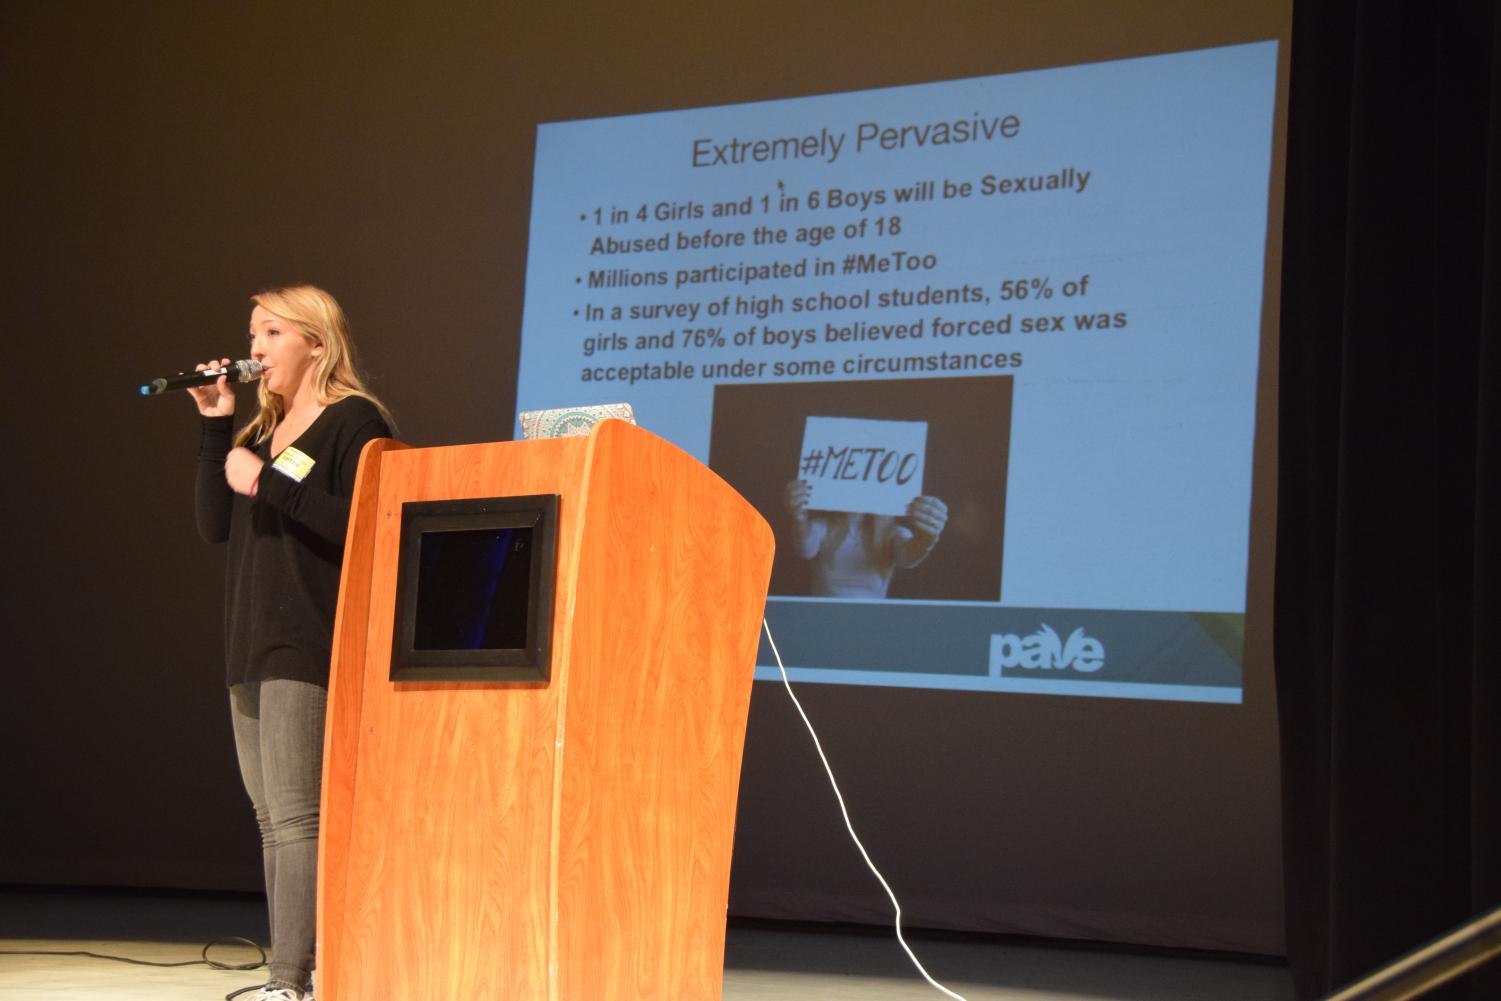 On March 21, the senior class went to the auditorium to listen to PAVE’s message about sexual assault. 